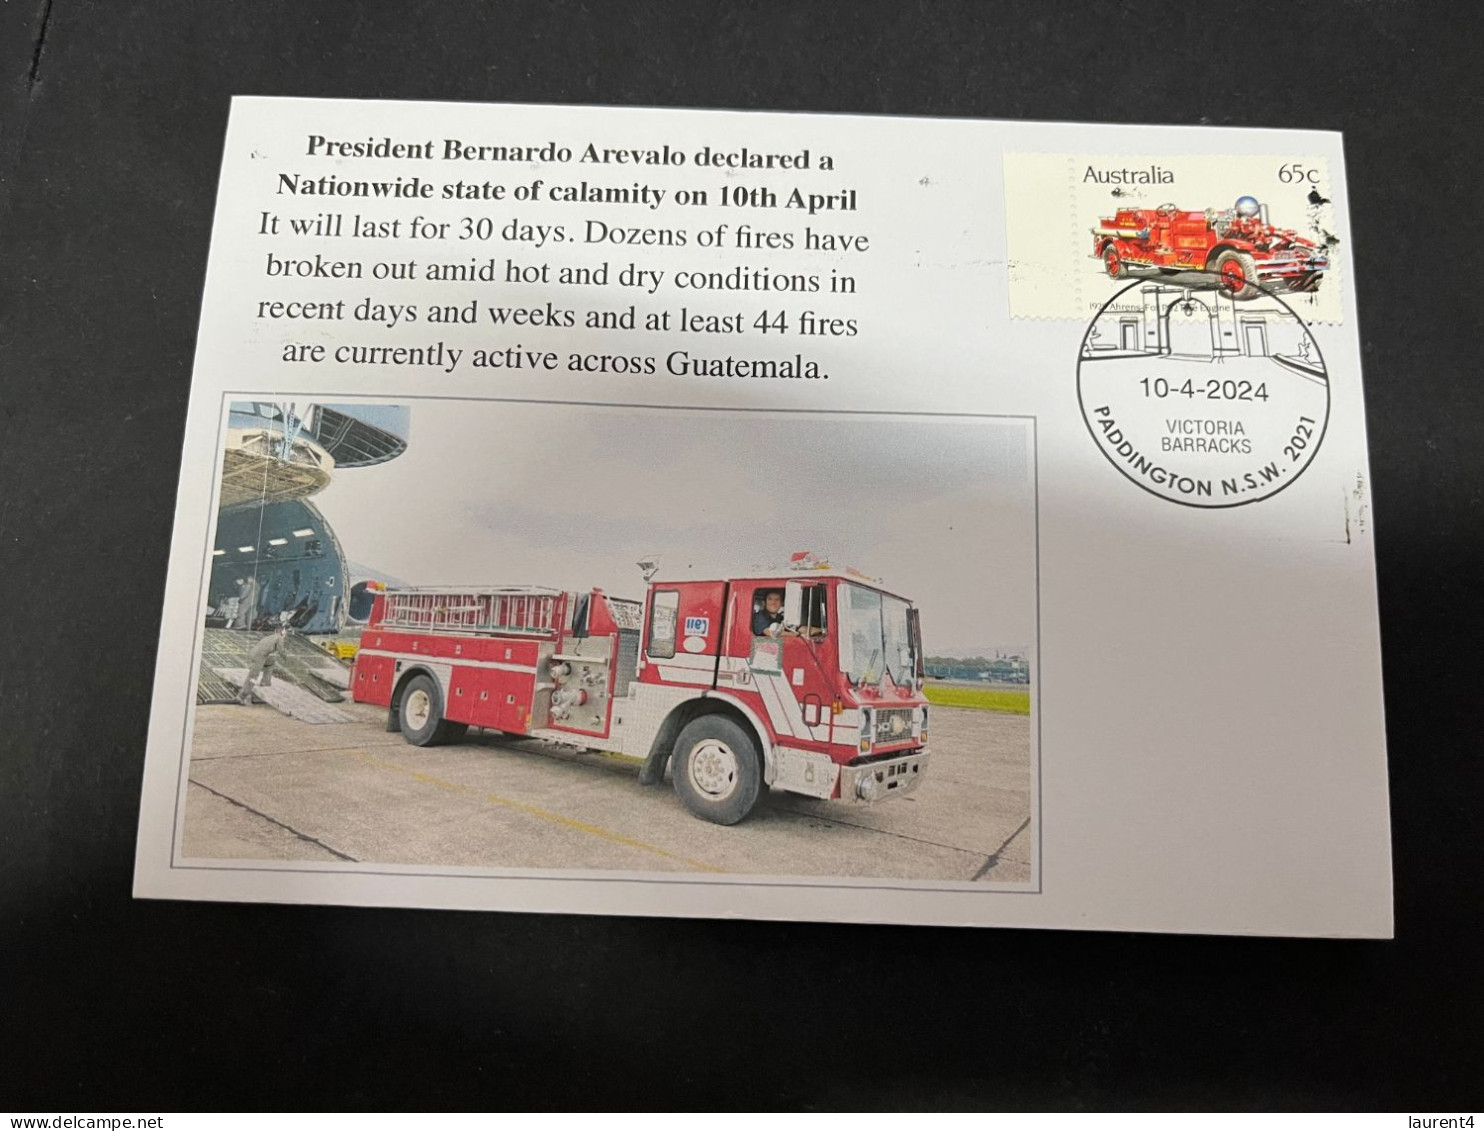 8-5-2024 (4 Z 27) Guatemala President Declared Nationwide State Of Calamity On 10th April (Fire Truck Stamp) - Feuerwehr